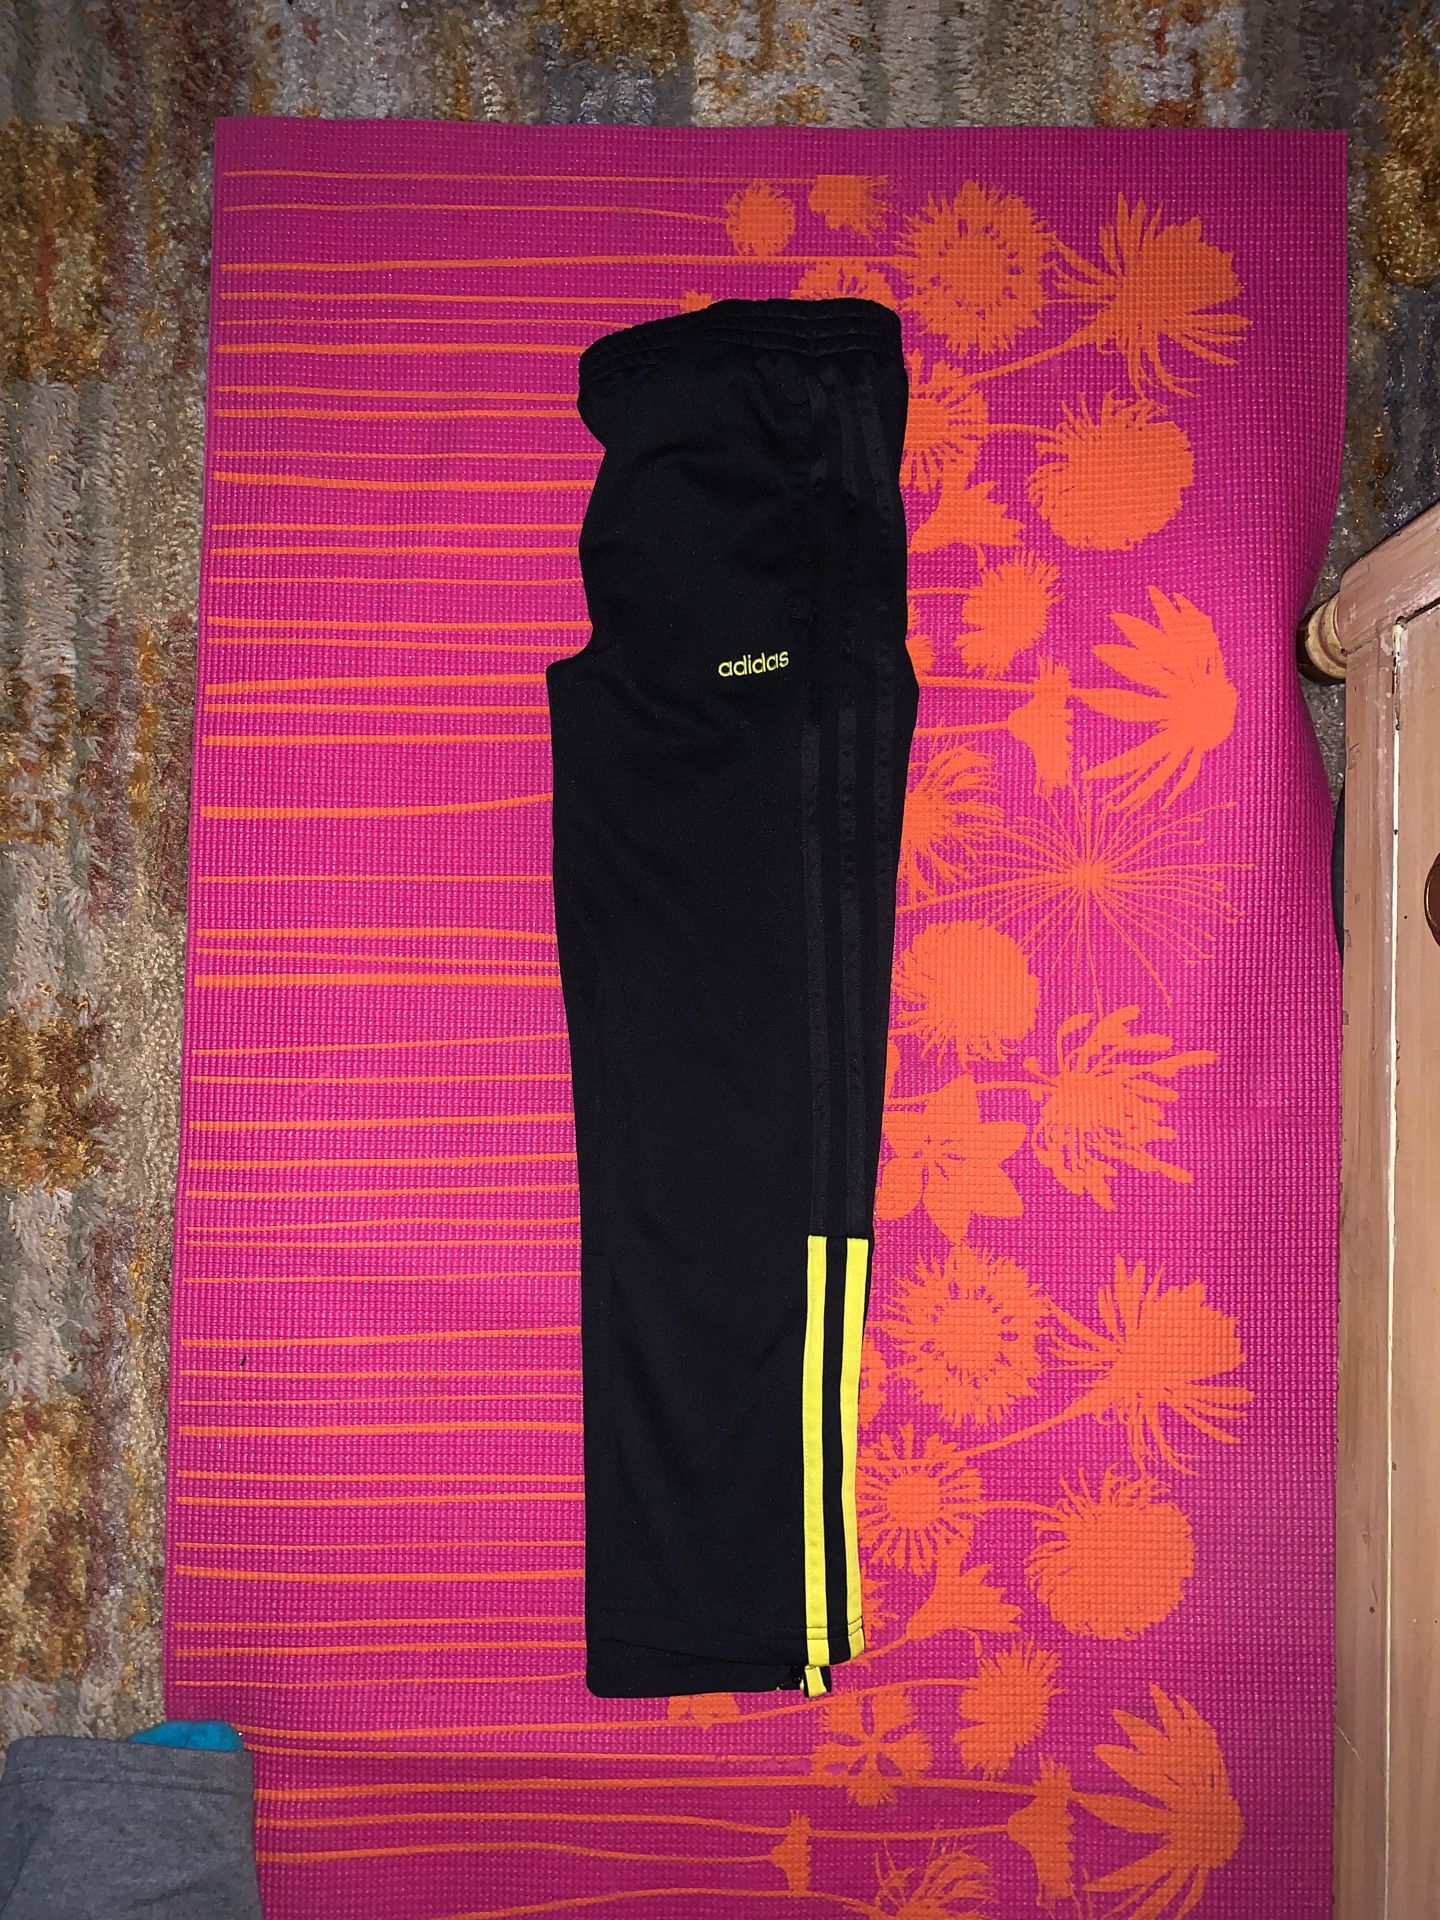 Adidas size seven brand new joggers!